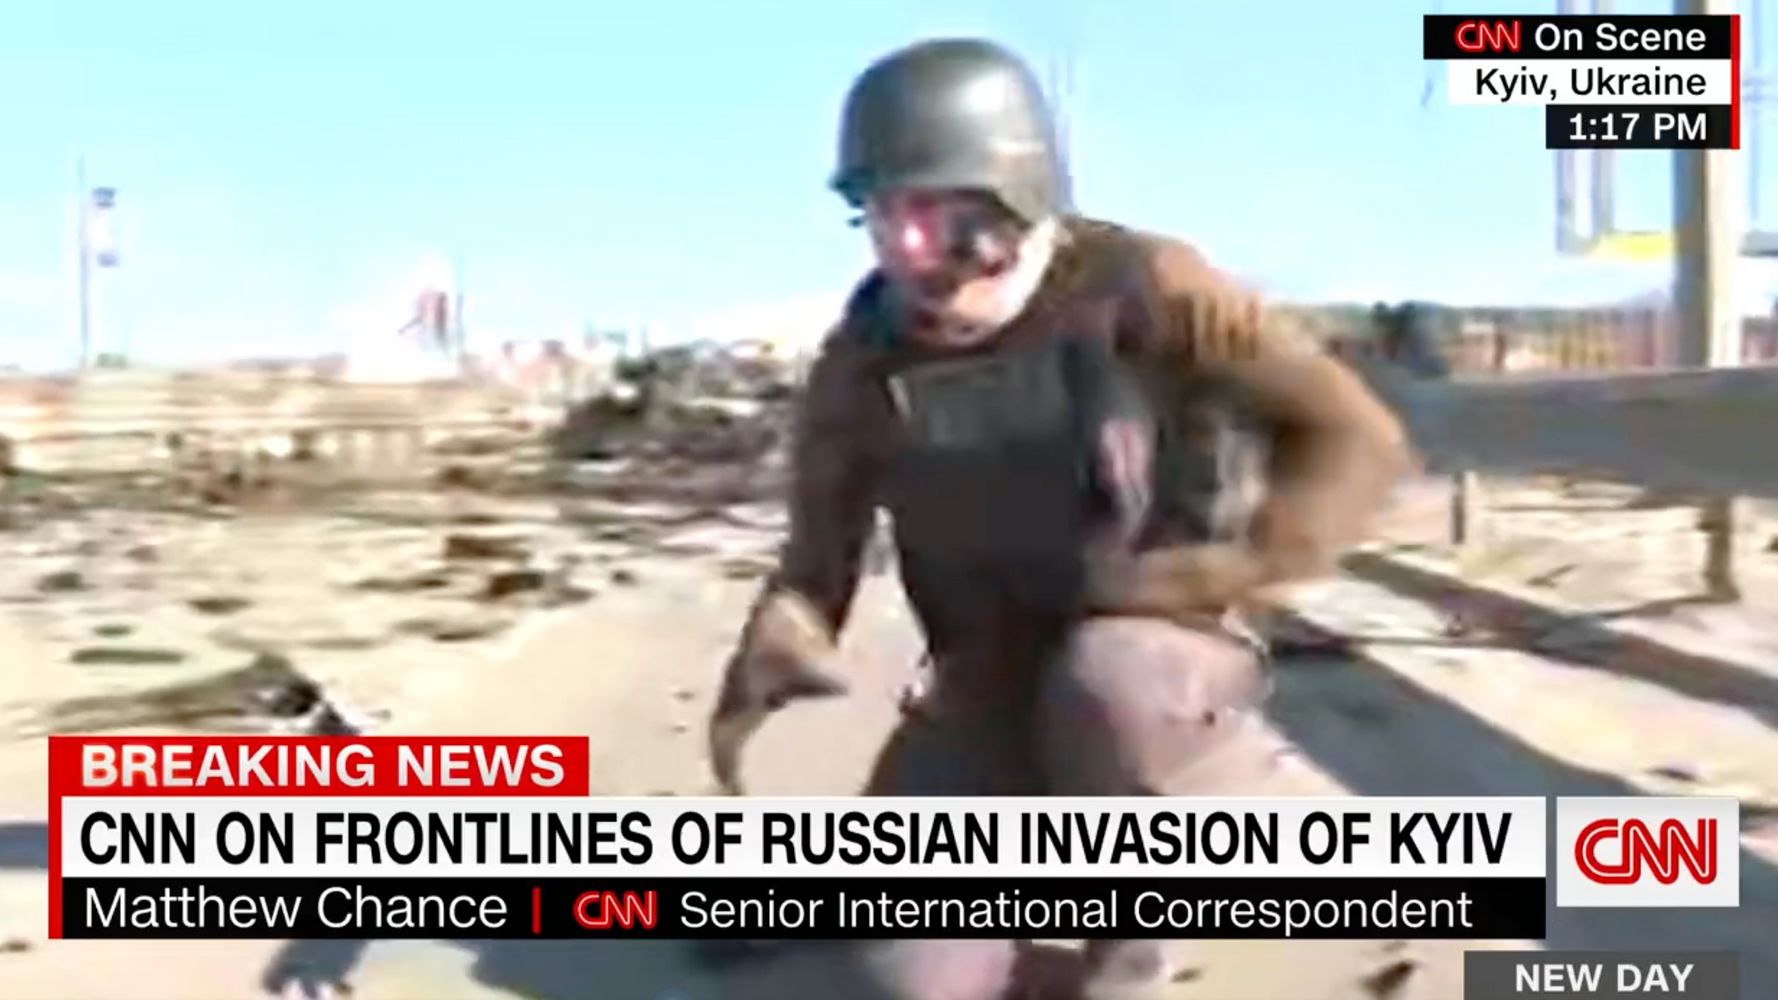 CNN Correspondent Backs Away From Grenade During Live Report From Kyiv